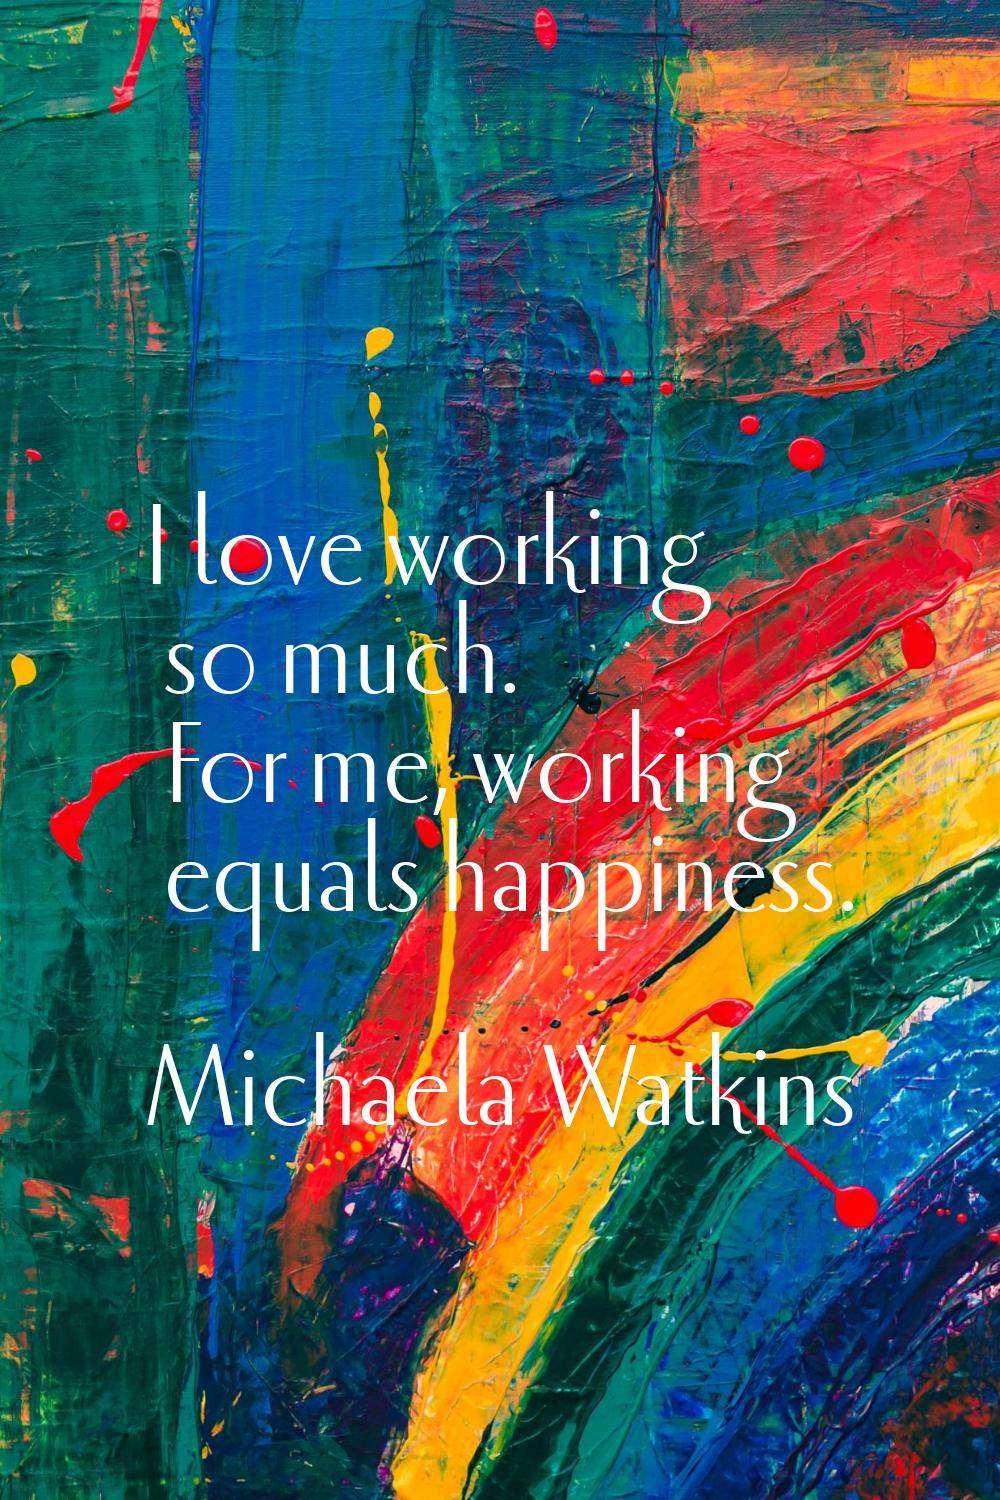 I love working so much. For me, working equals happiness.